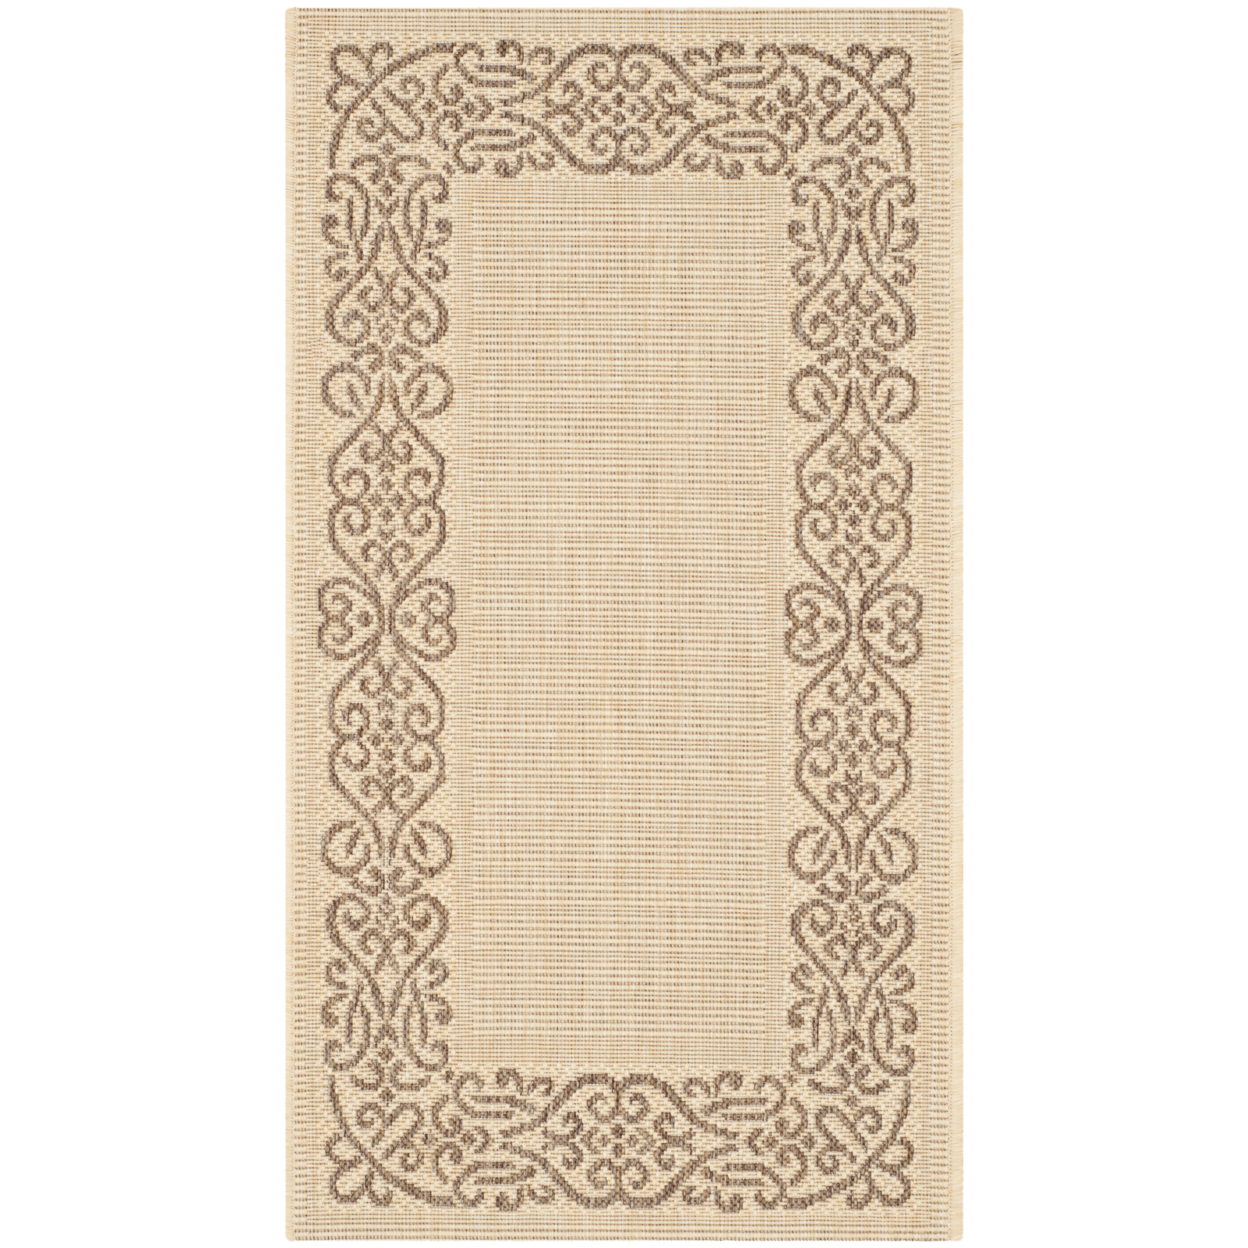 SAFAVIEH Outdoor CY1588-3001 Courtyard Natural / Brown Rug - 2' 3 X 6' 7